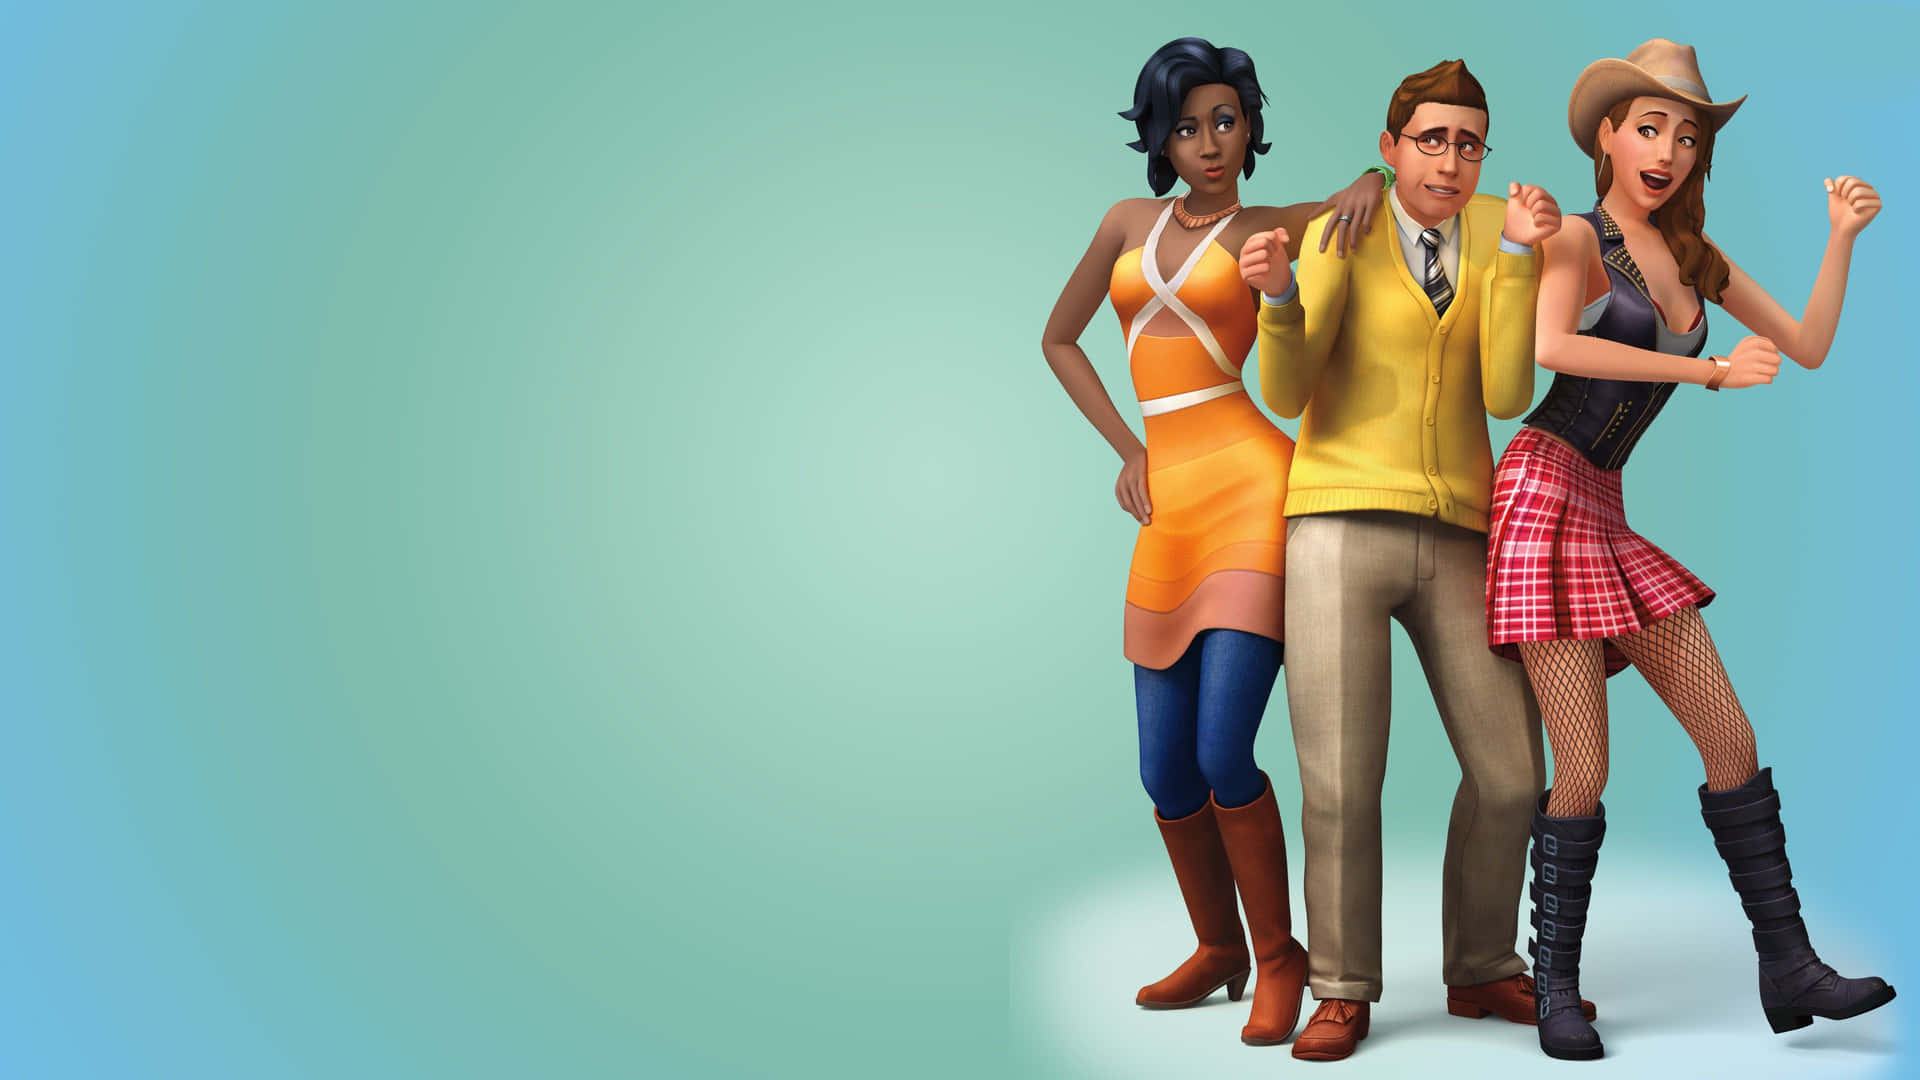 The Sims 4 Game Wallpaper - Colorful Characters in High Definition Wallpaper